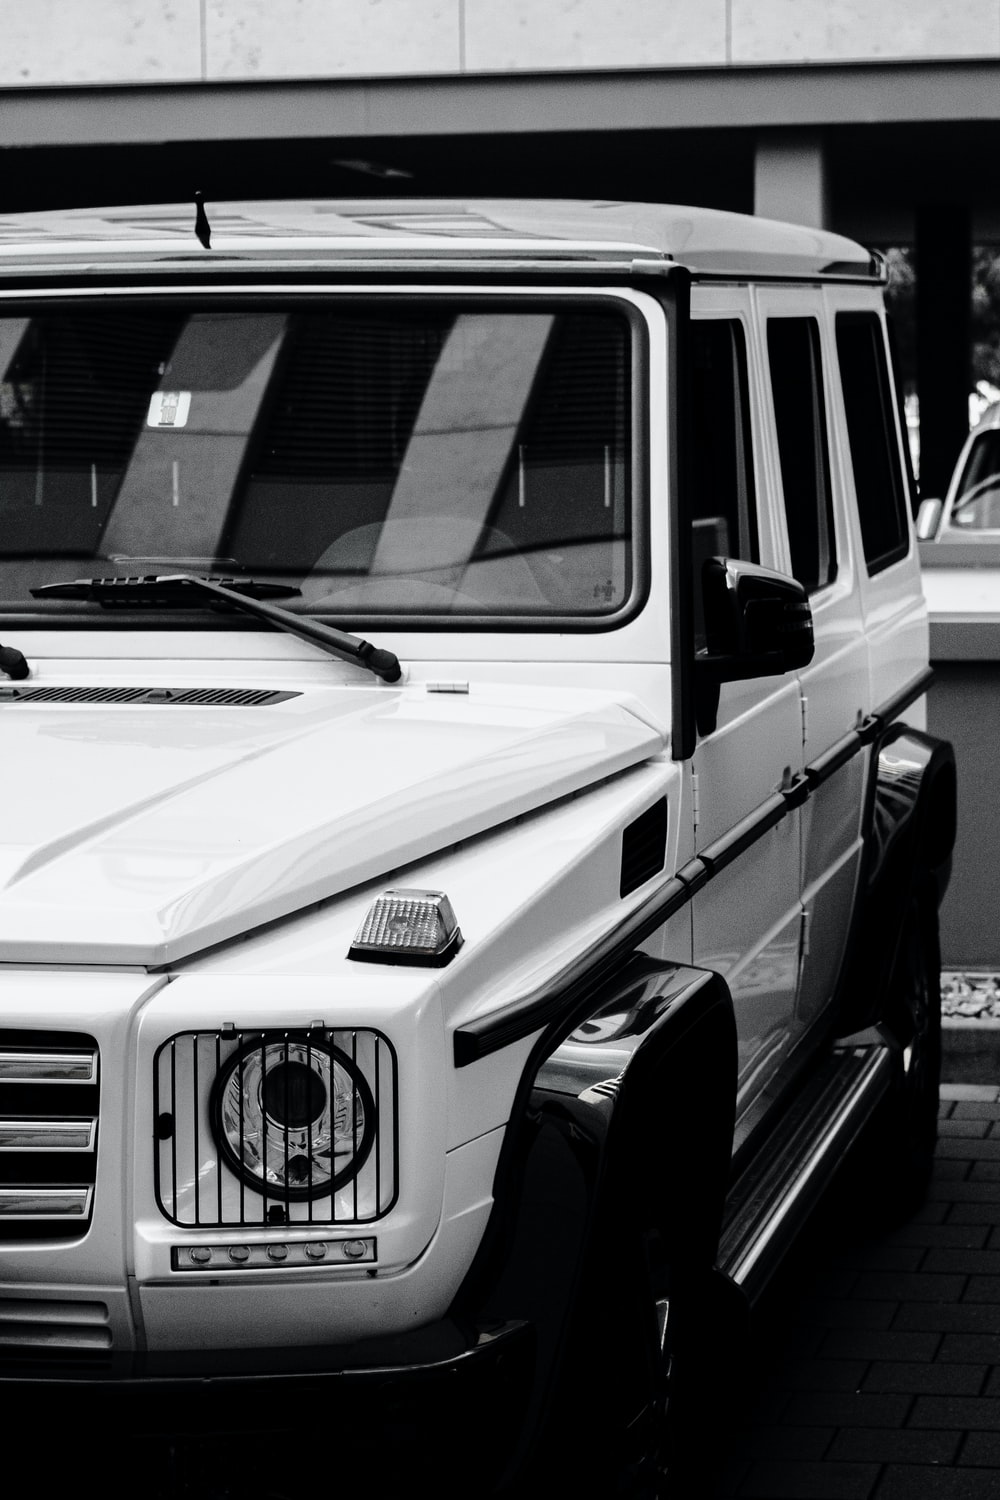 Mercedes G Wagon Picture. Download Free Image